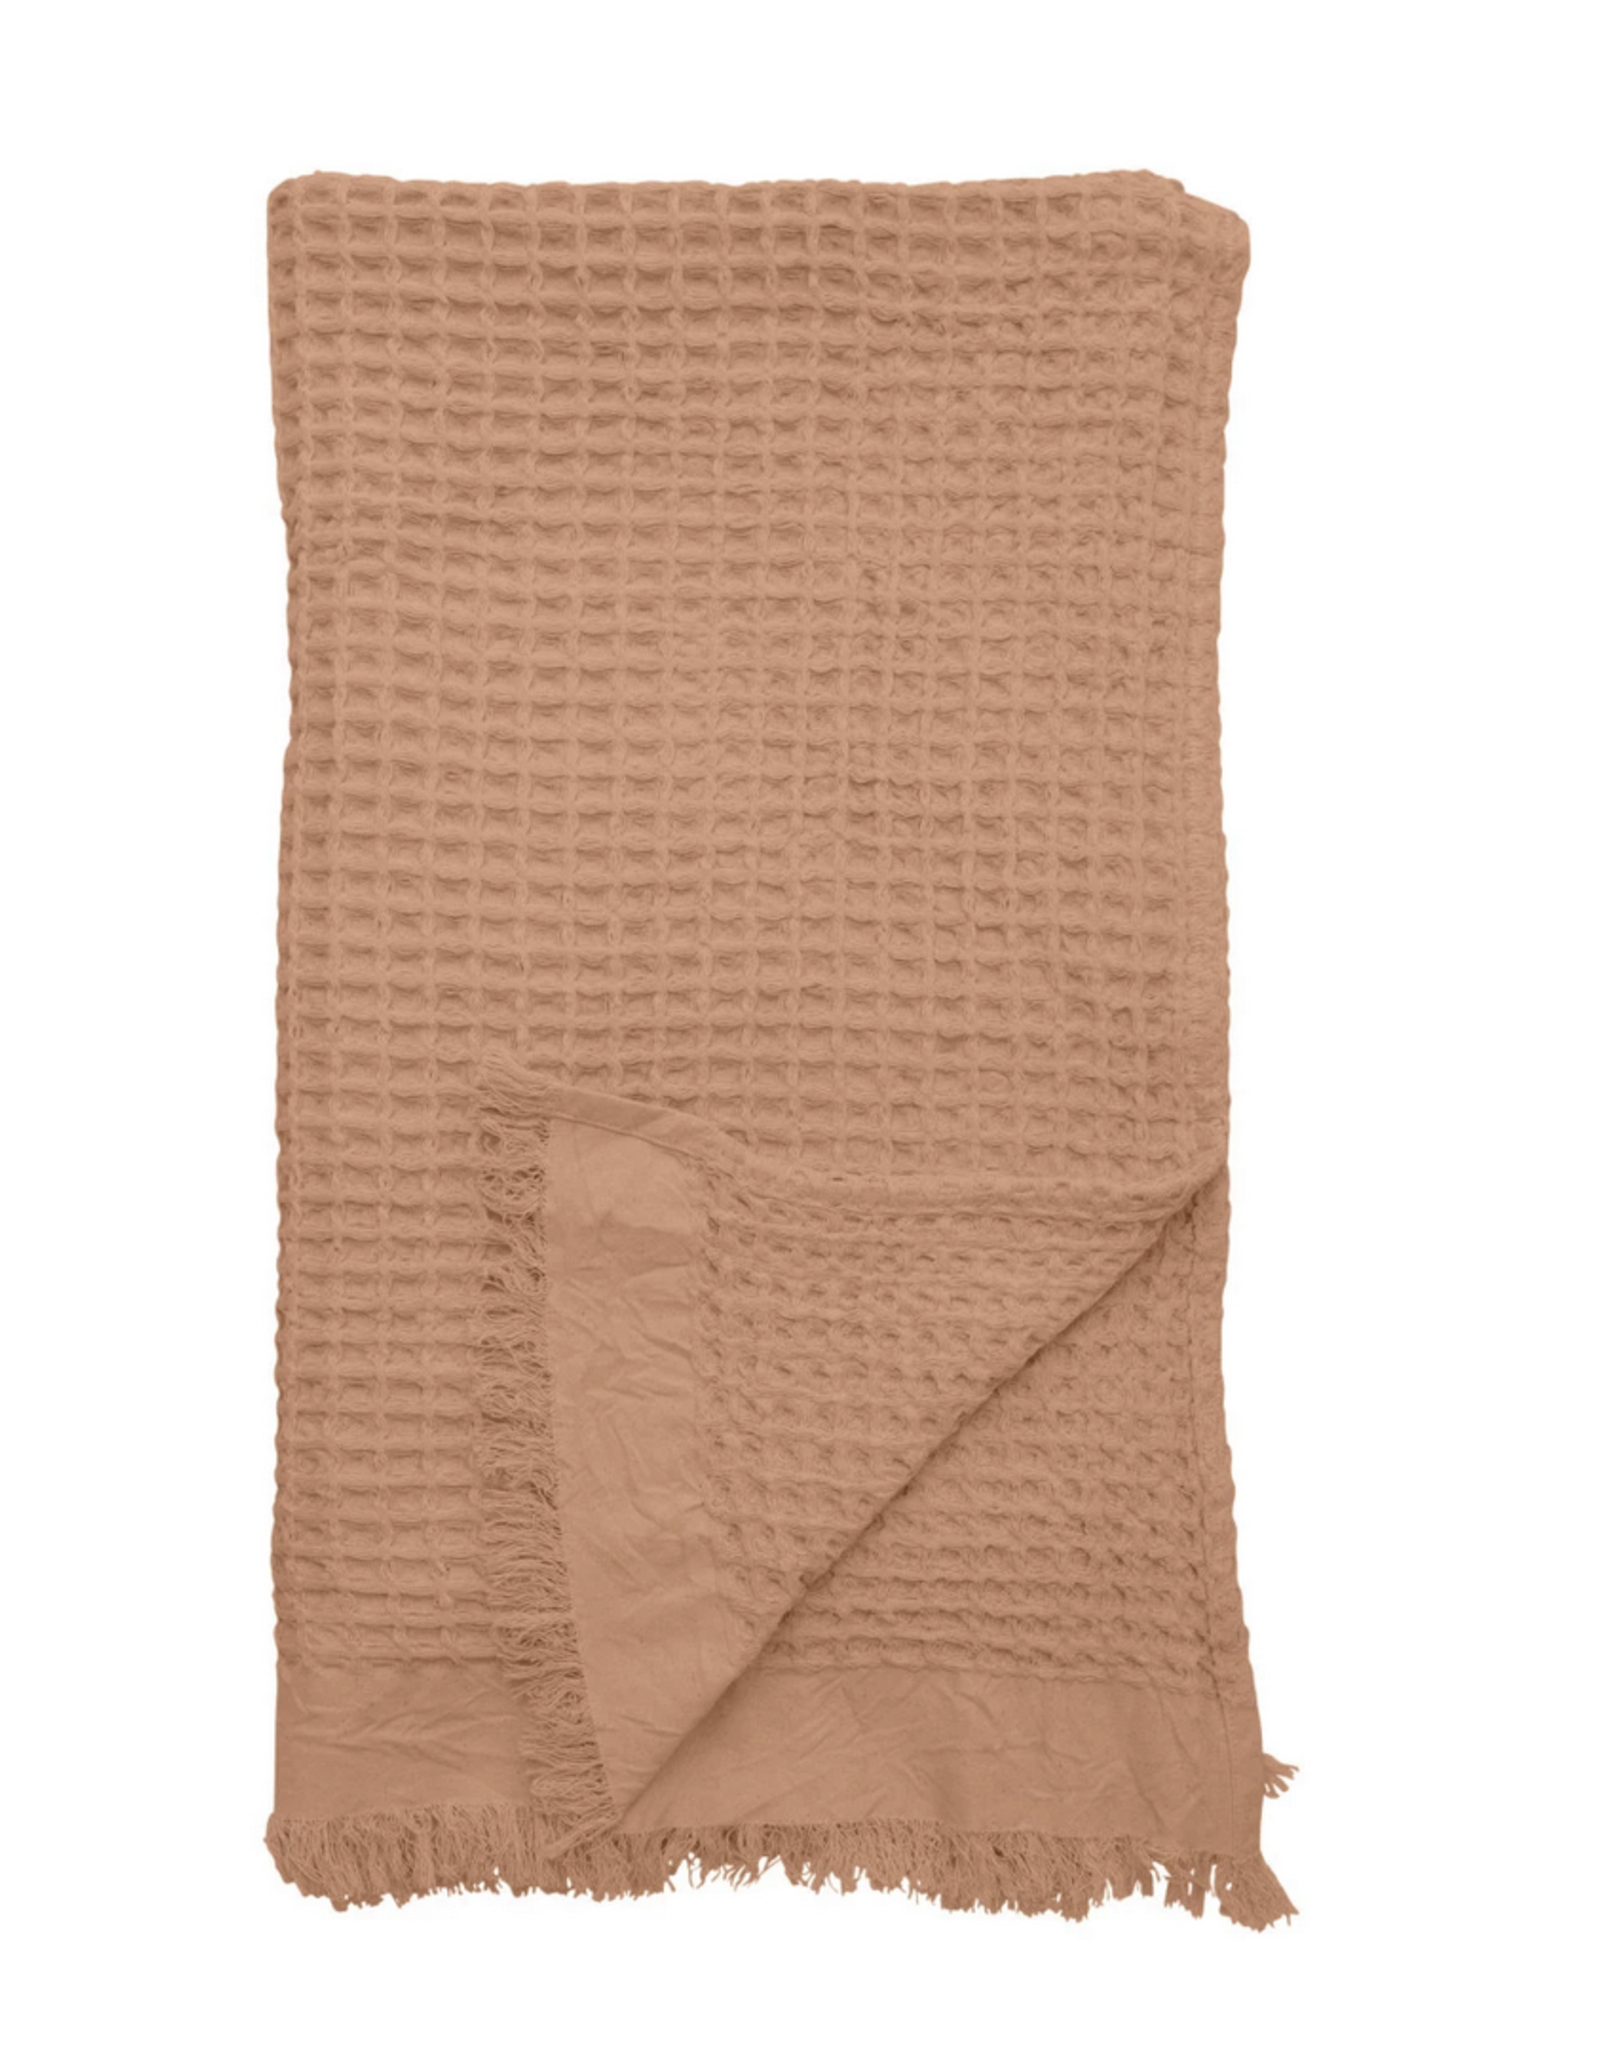 Creative Co-Op Cotton Waffle Weave Throw with Fringe, 50 x 60, Blush